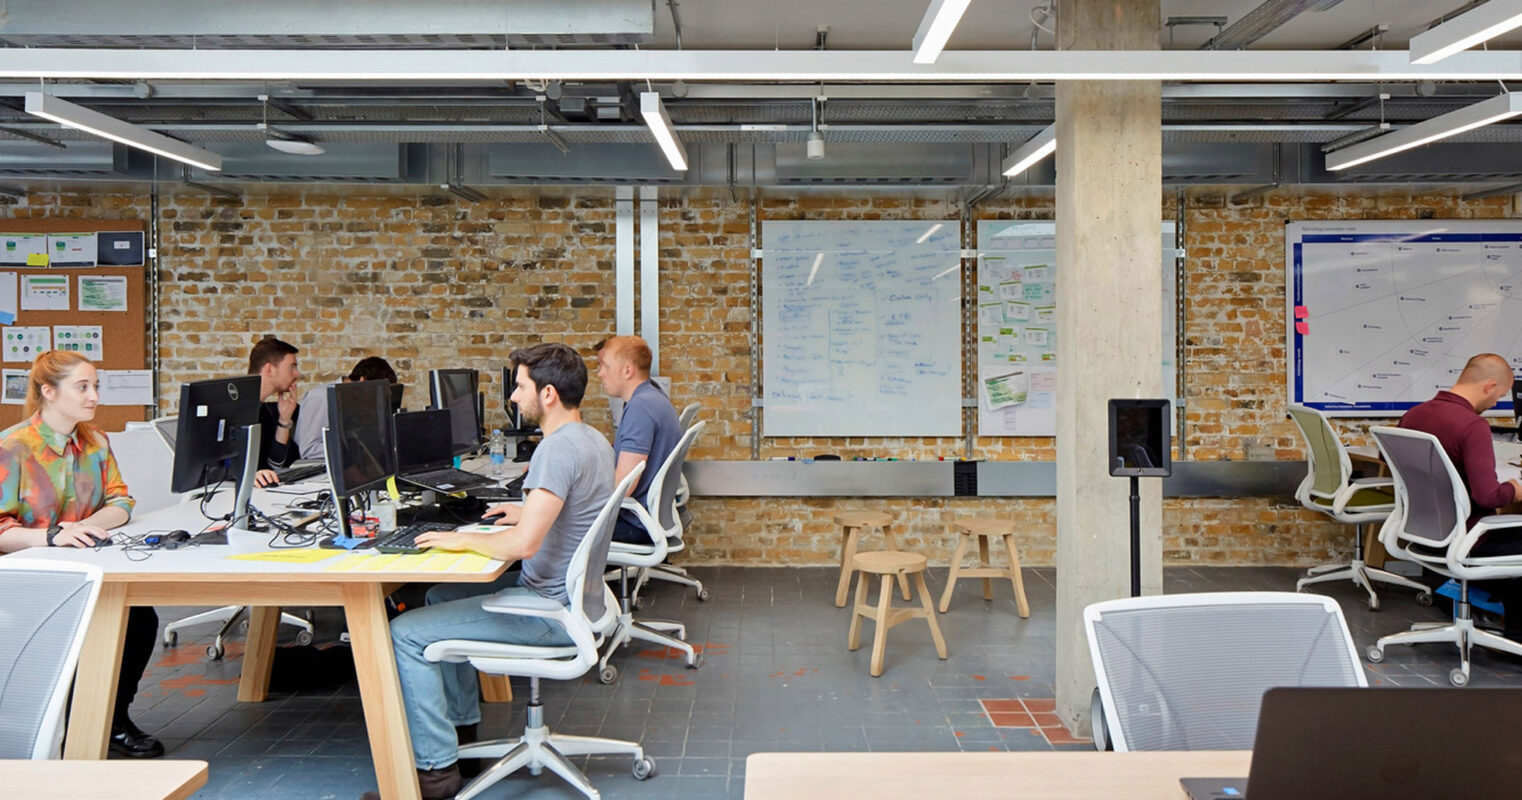 Open-plan workspace with exposed ductwork and brick walls, filled with collaborative clusters of desks and whiteboards, bustling with team interaction and brainstorming.